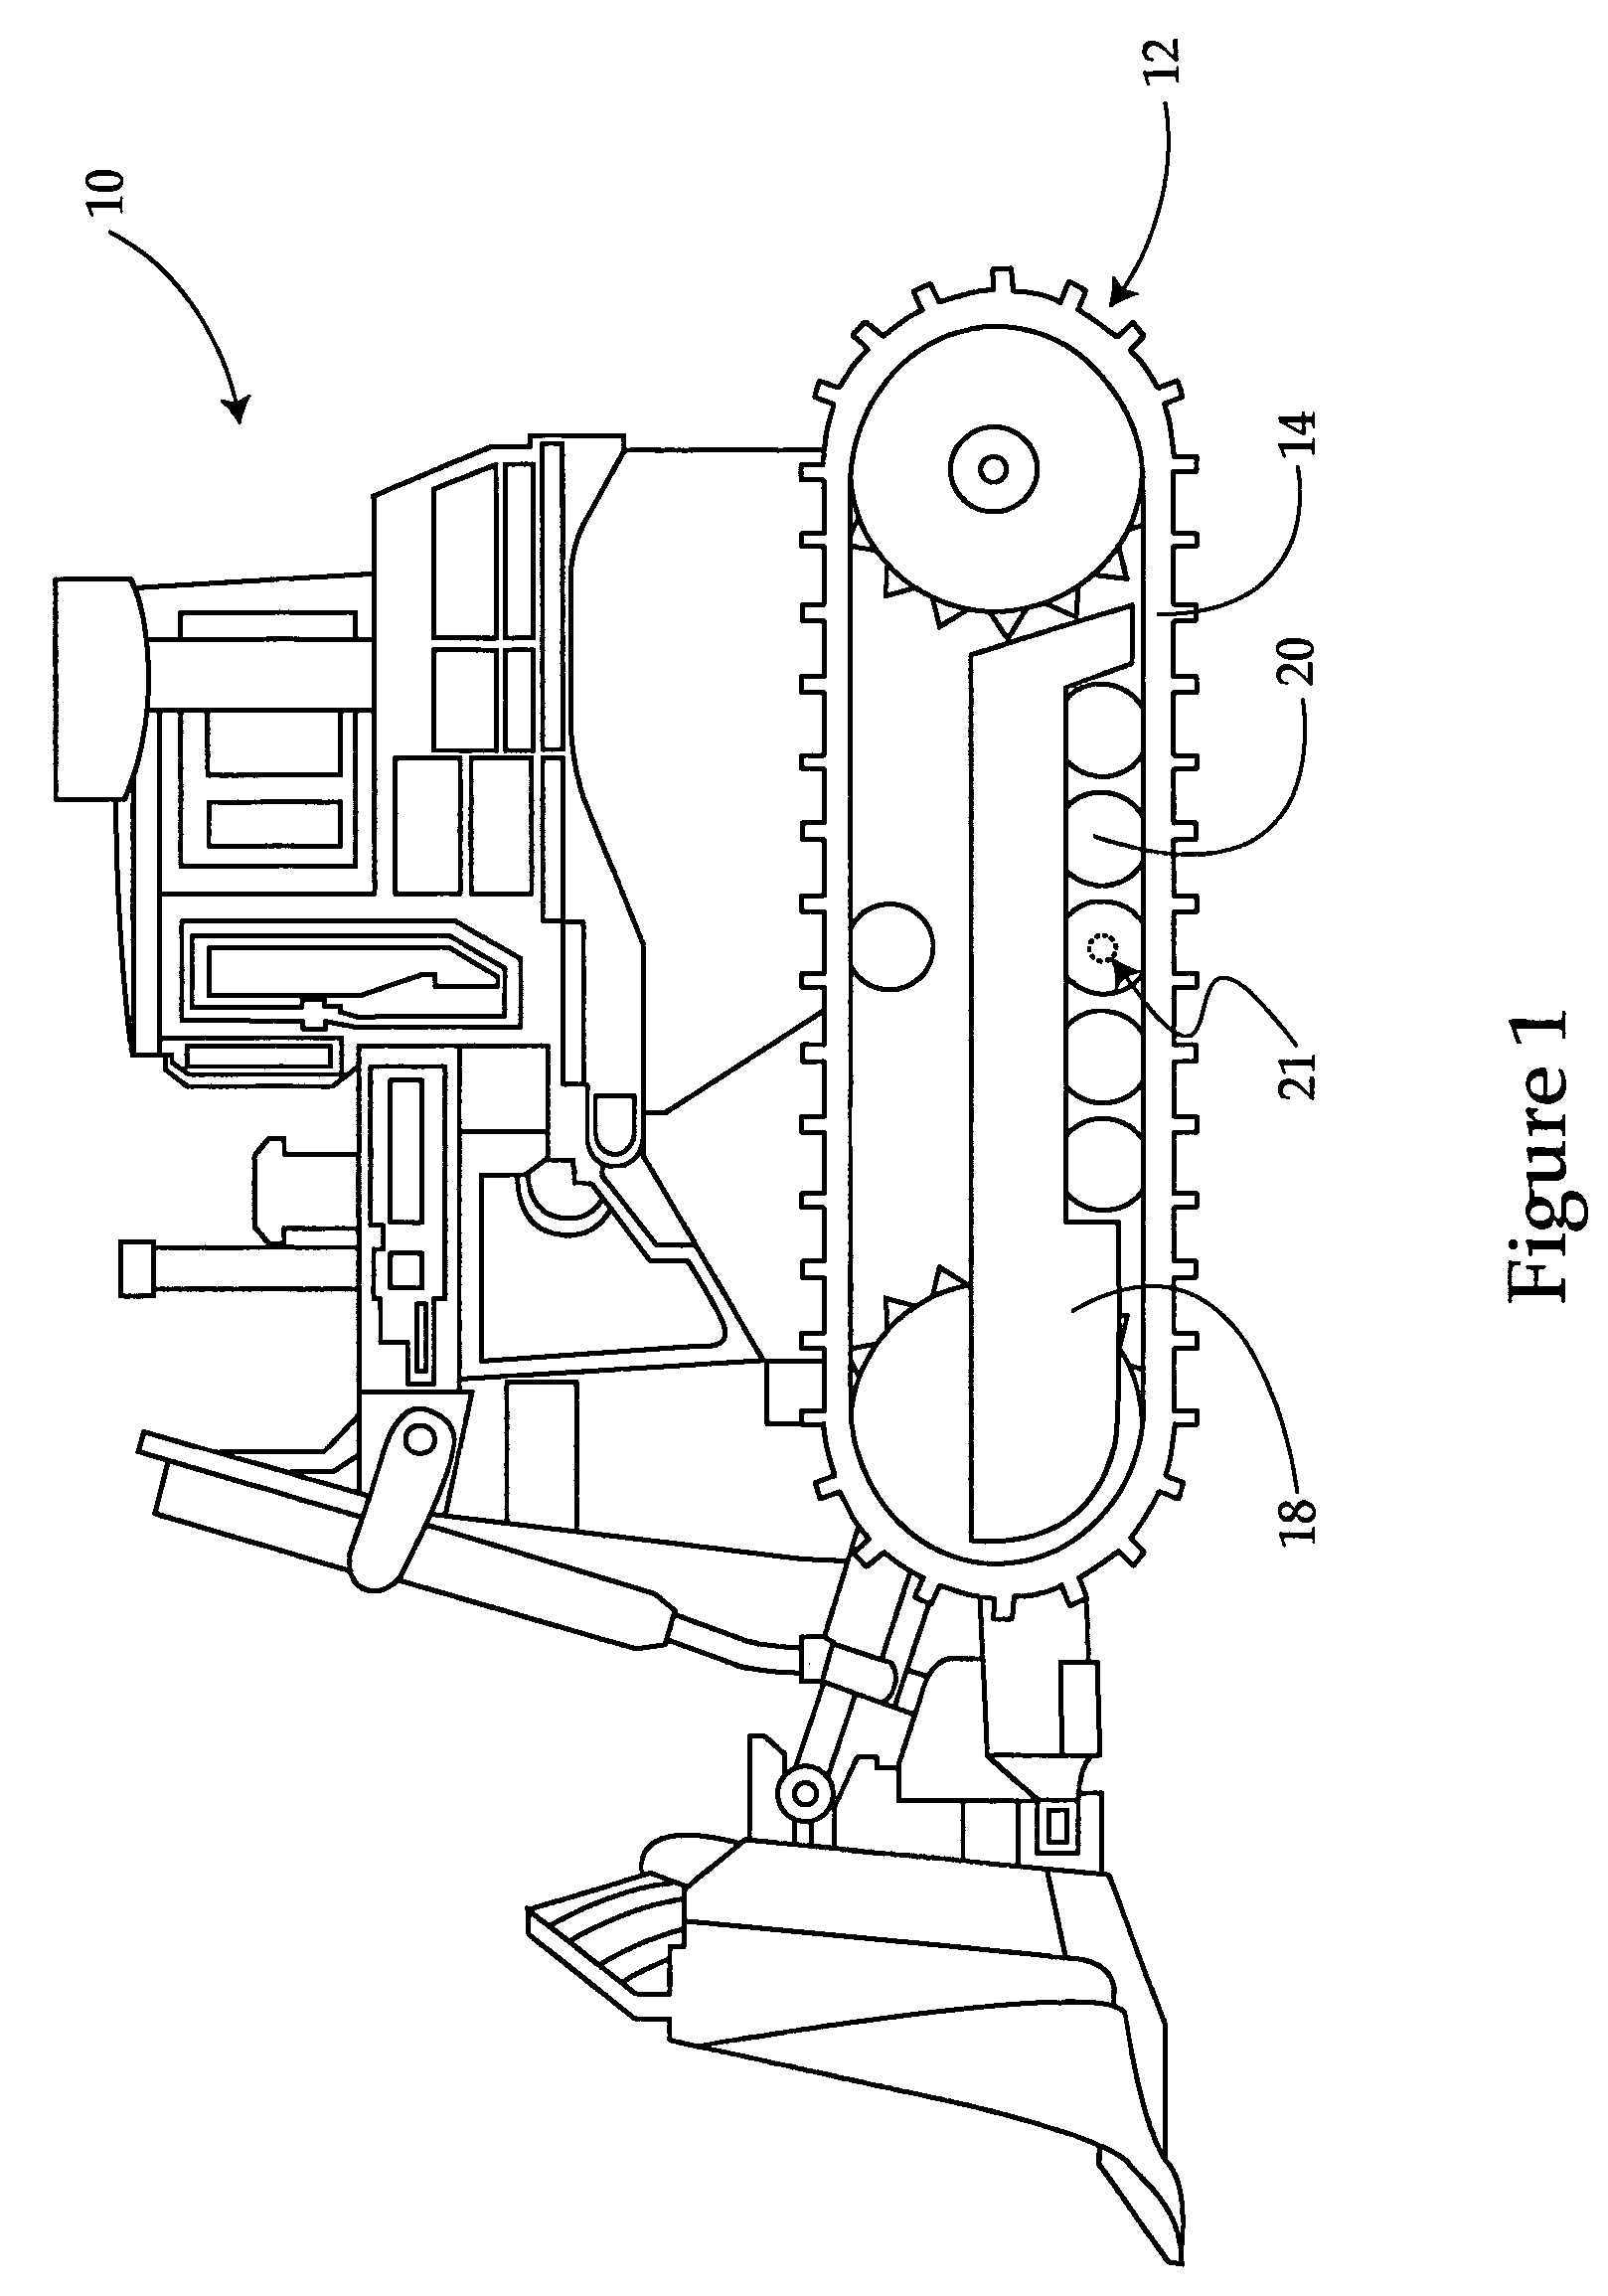 Machine track roller assembly